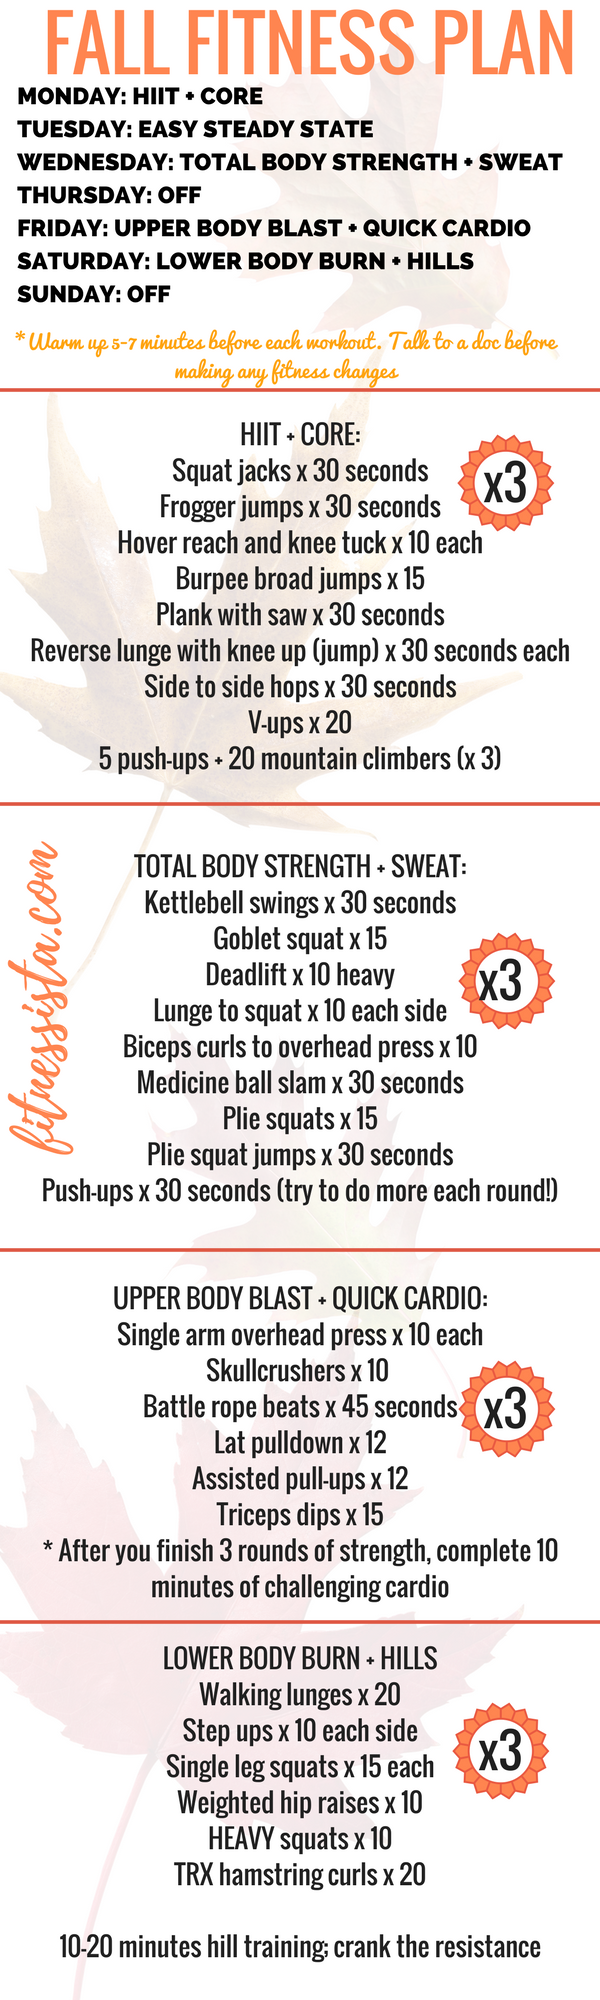 A full fall fitness plan! Perfect for the next time you don't know what to do at the gym, or are looking for a plan to change up your routine. Cardio, strength, HIIT and rest. fitnessista.com